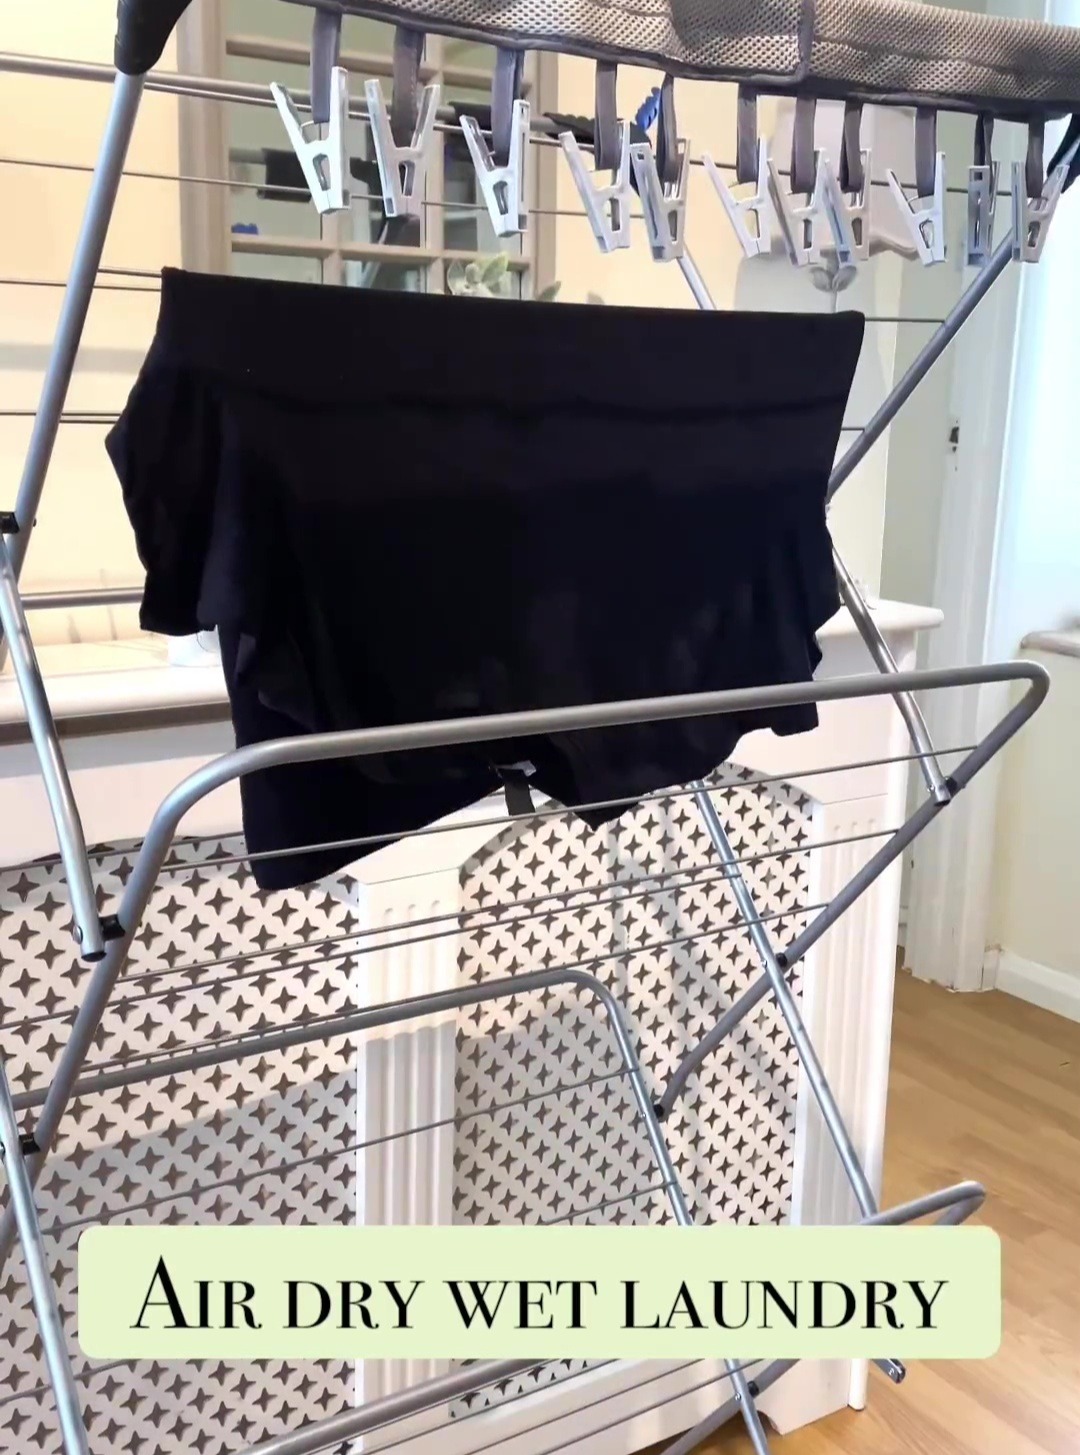 You could also save money by not using the tumble dryer and leaving your clothes to air dry